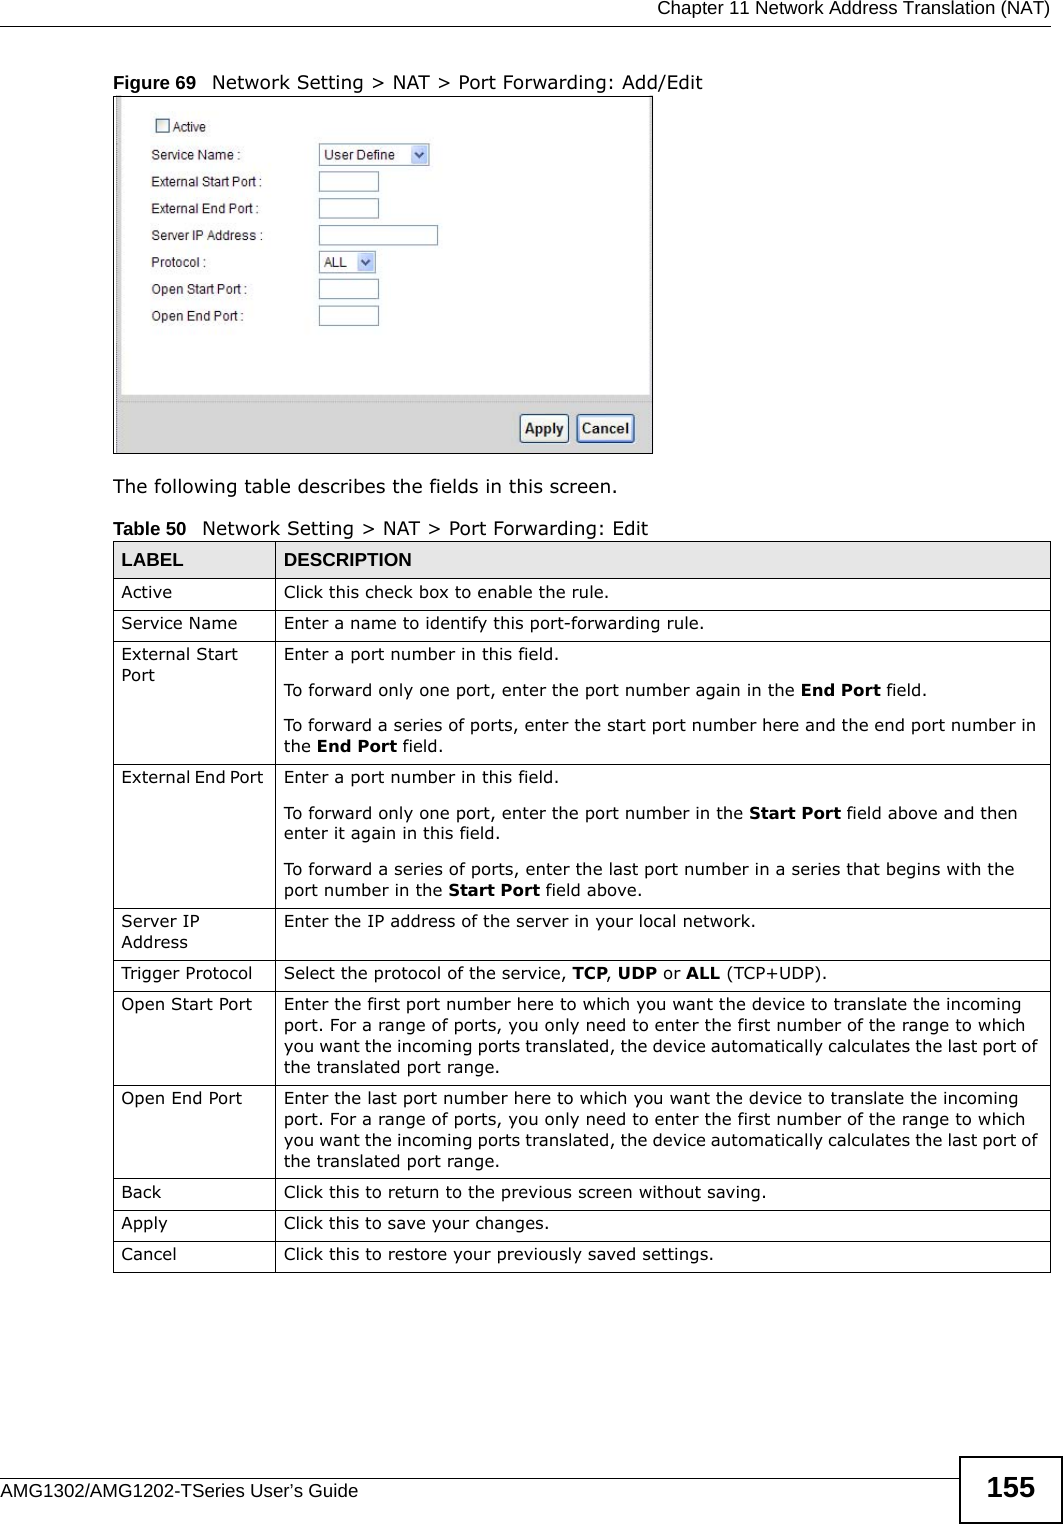  Chapter 11 Network Address Translation (NAT)AMG1302/AMG1202-TSeries User’s Guide 155Figure 69   Network Setting &gt; NAT &gt; Port Forwarding: Add/Edit The following table describes the fields in this screen. Table 50   Network Setting &gt; NAT &gt; Port Forwarding: Edit LABEL DESCRIPTIONActive Click this check box to enable the rule.Service Name Enter a name to identify this port-forwarding rule.External Start Port Enter a port number in this field. To forward only one port, enter the port number again in the End Port field. To forward a series of ports, enter the start port number here and the end port number in the End Port field.External End Port  Enter a port number in this field. To forward only one port, enter the port number in the Start Port field above and then enter it again in this field. To forward a series of ports, enter the last port number in a series that begins with the port number in the Start Port field above.Server IP AddressEnter the IP address of the server in your local network.Trigger Protocol Select the protocol of the service, TCP, UDP or ALL (TCP+UDP).Open Start Port Enter the first port number here to which you want the device to translate the incoming port. For a range of ports, you only need to enter the first number of the range to which you want the incoming ports translated, the device automatically calculates the last port of the translated port range.Open End Port Enter the last port number here to which you want the device to translate the incoming port. For a range of ports, you only need to enter the first number of the range to which you want the incoming ports translated, the device automatically calculates the last port of the translated port range.Back Click this to return to the previous screen without saving.Apply Click this to save your changes.Cancel Click this to restore your previously saved settings.